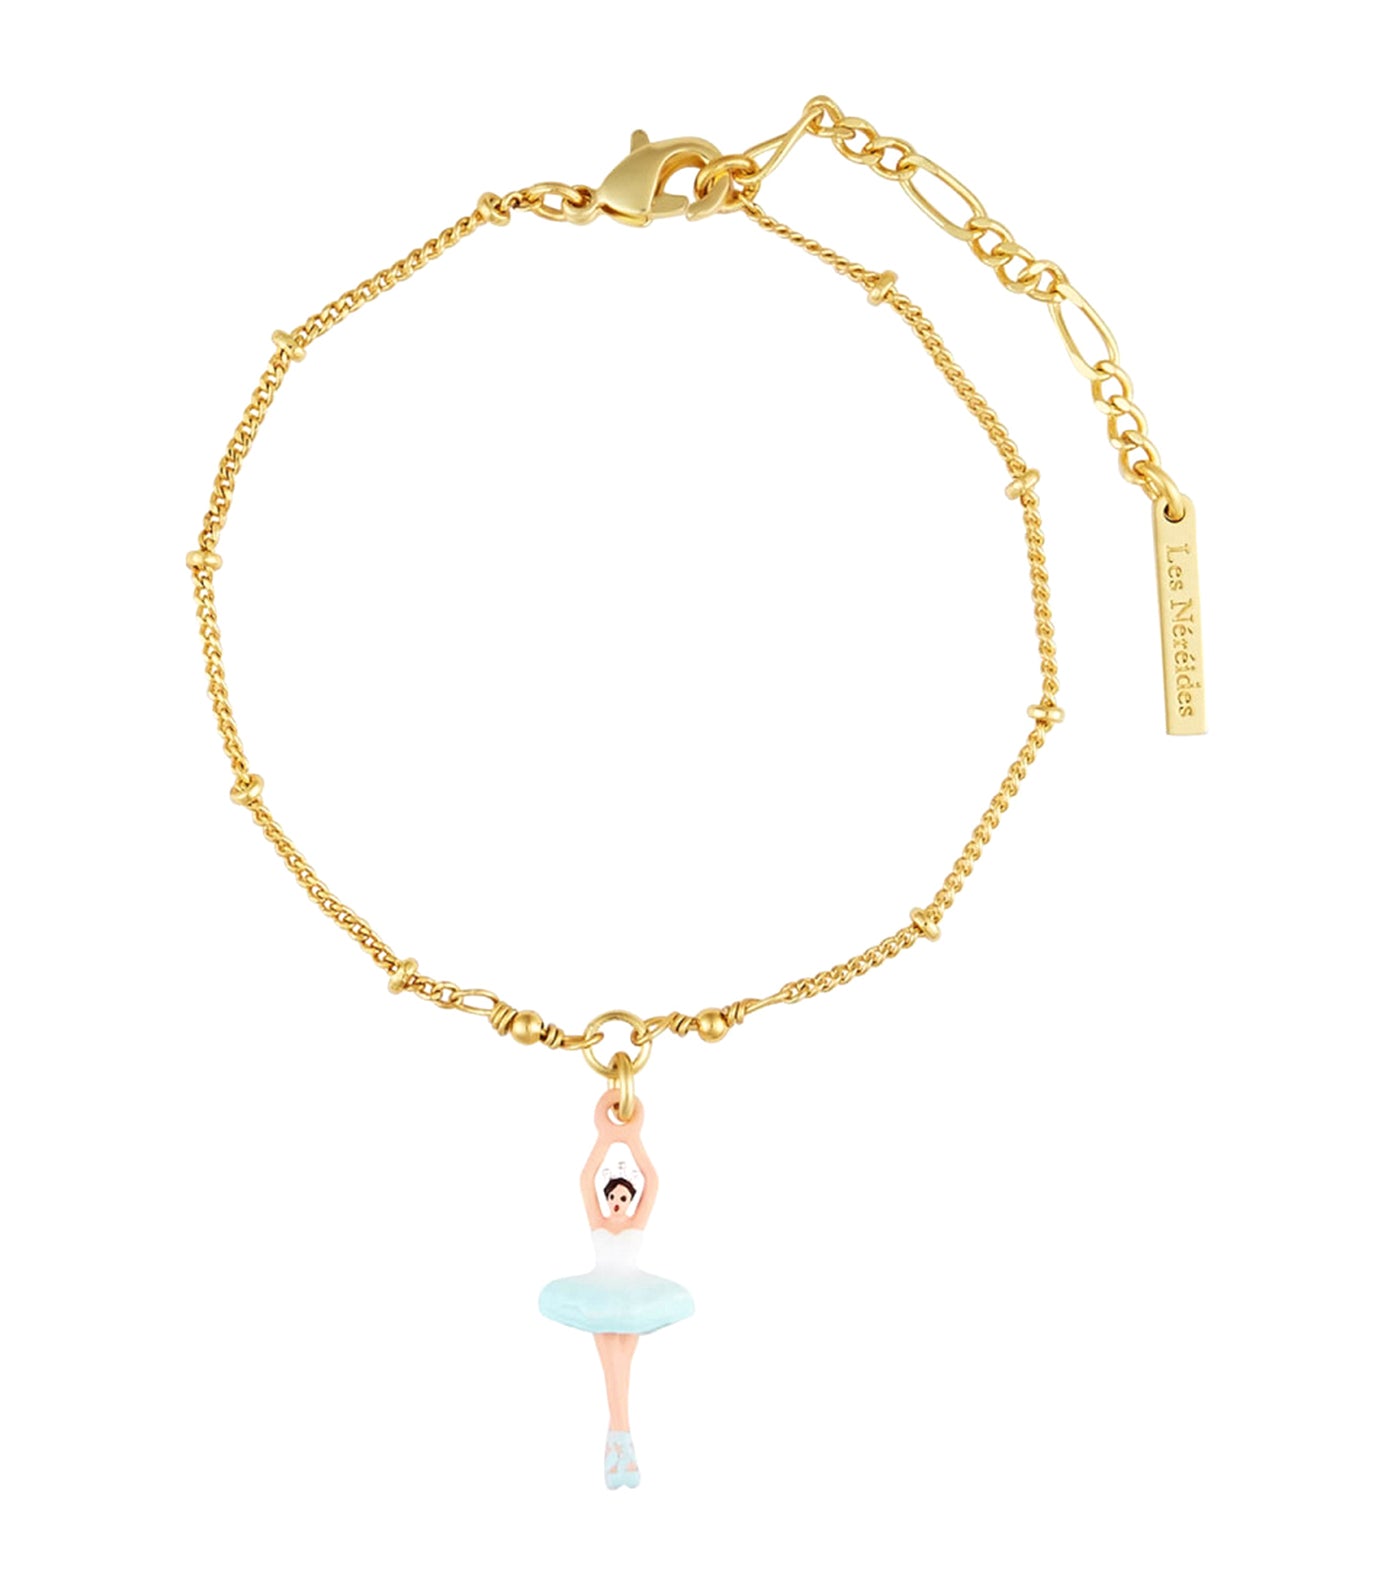 Ballerina And Faceted Bead Bracelet